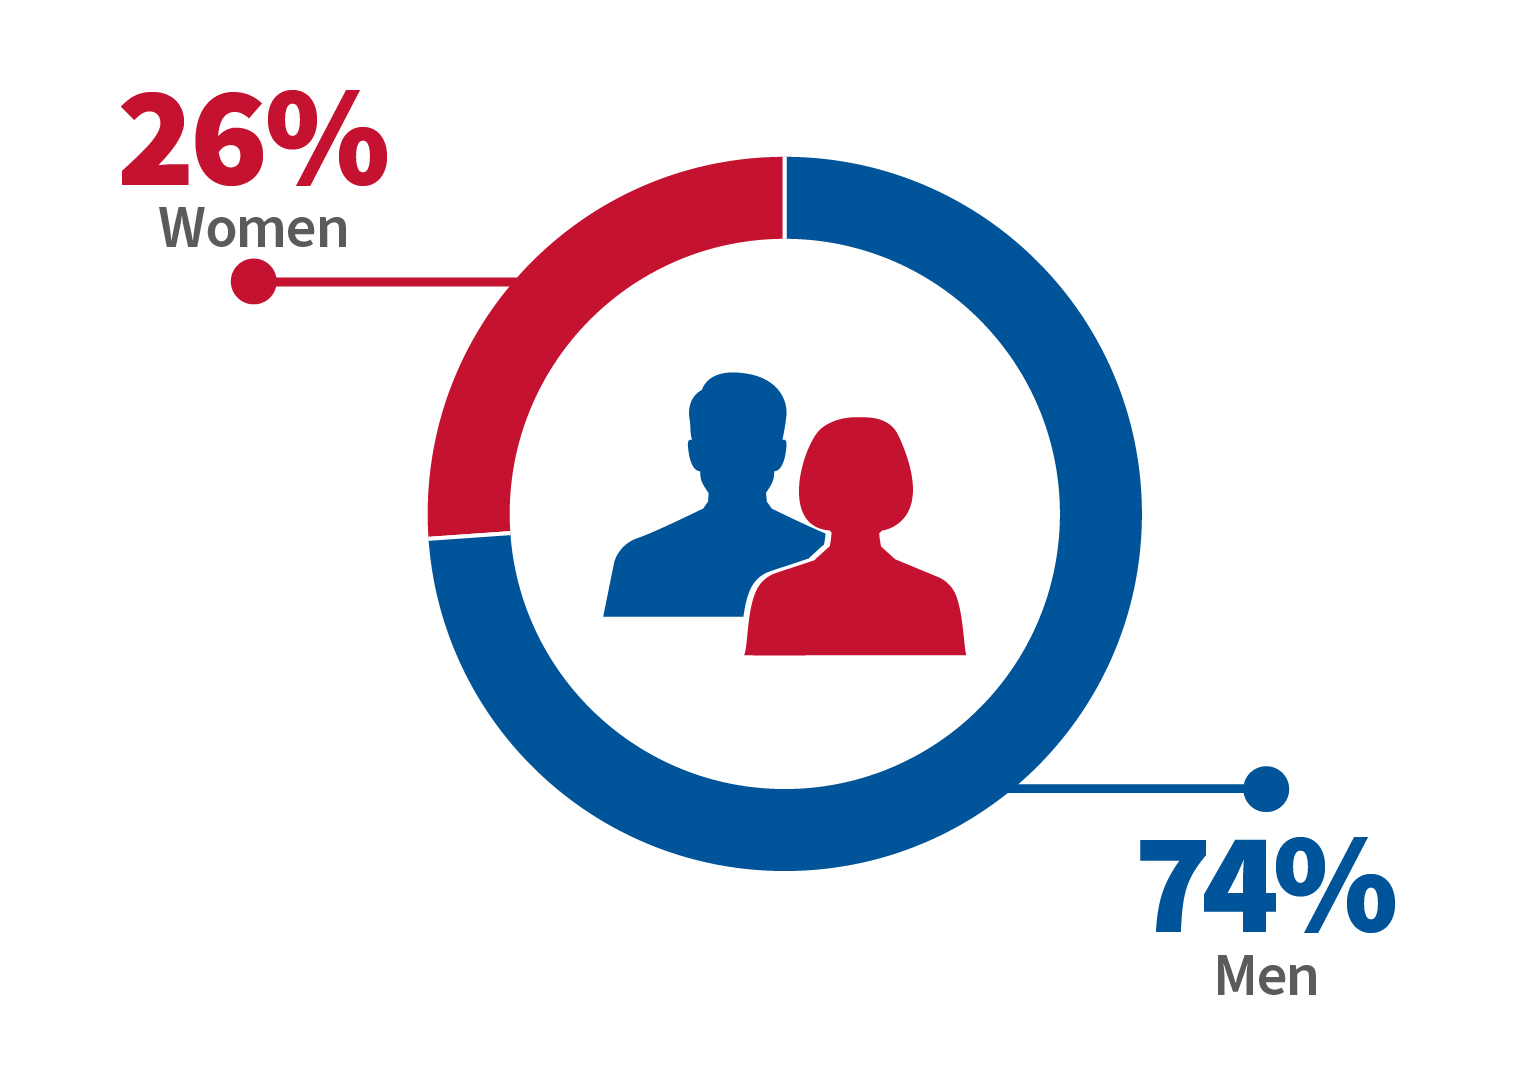 Graphic showing gender by percentage, 26 for women and 74 for men